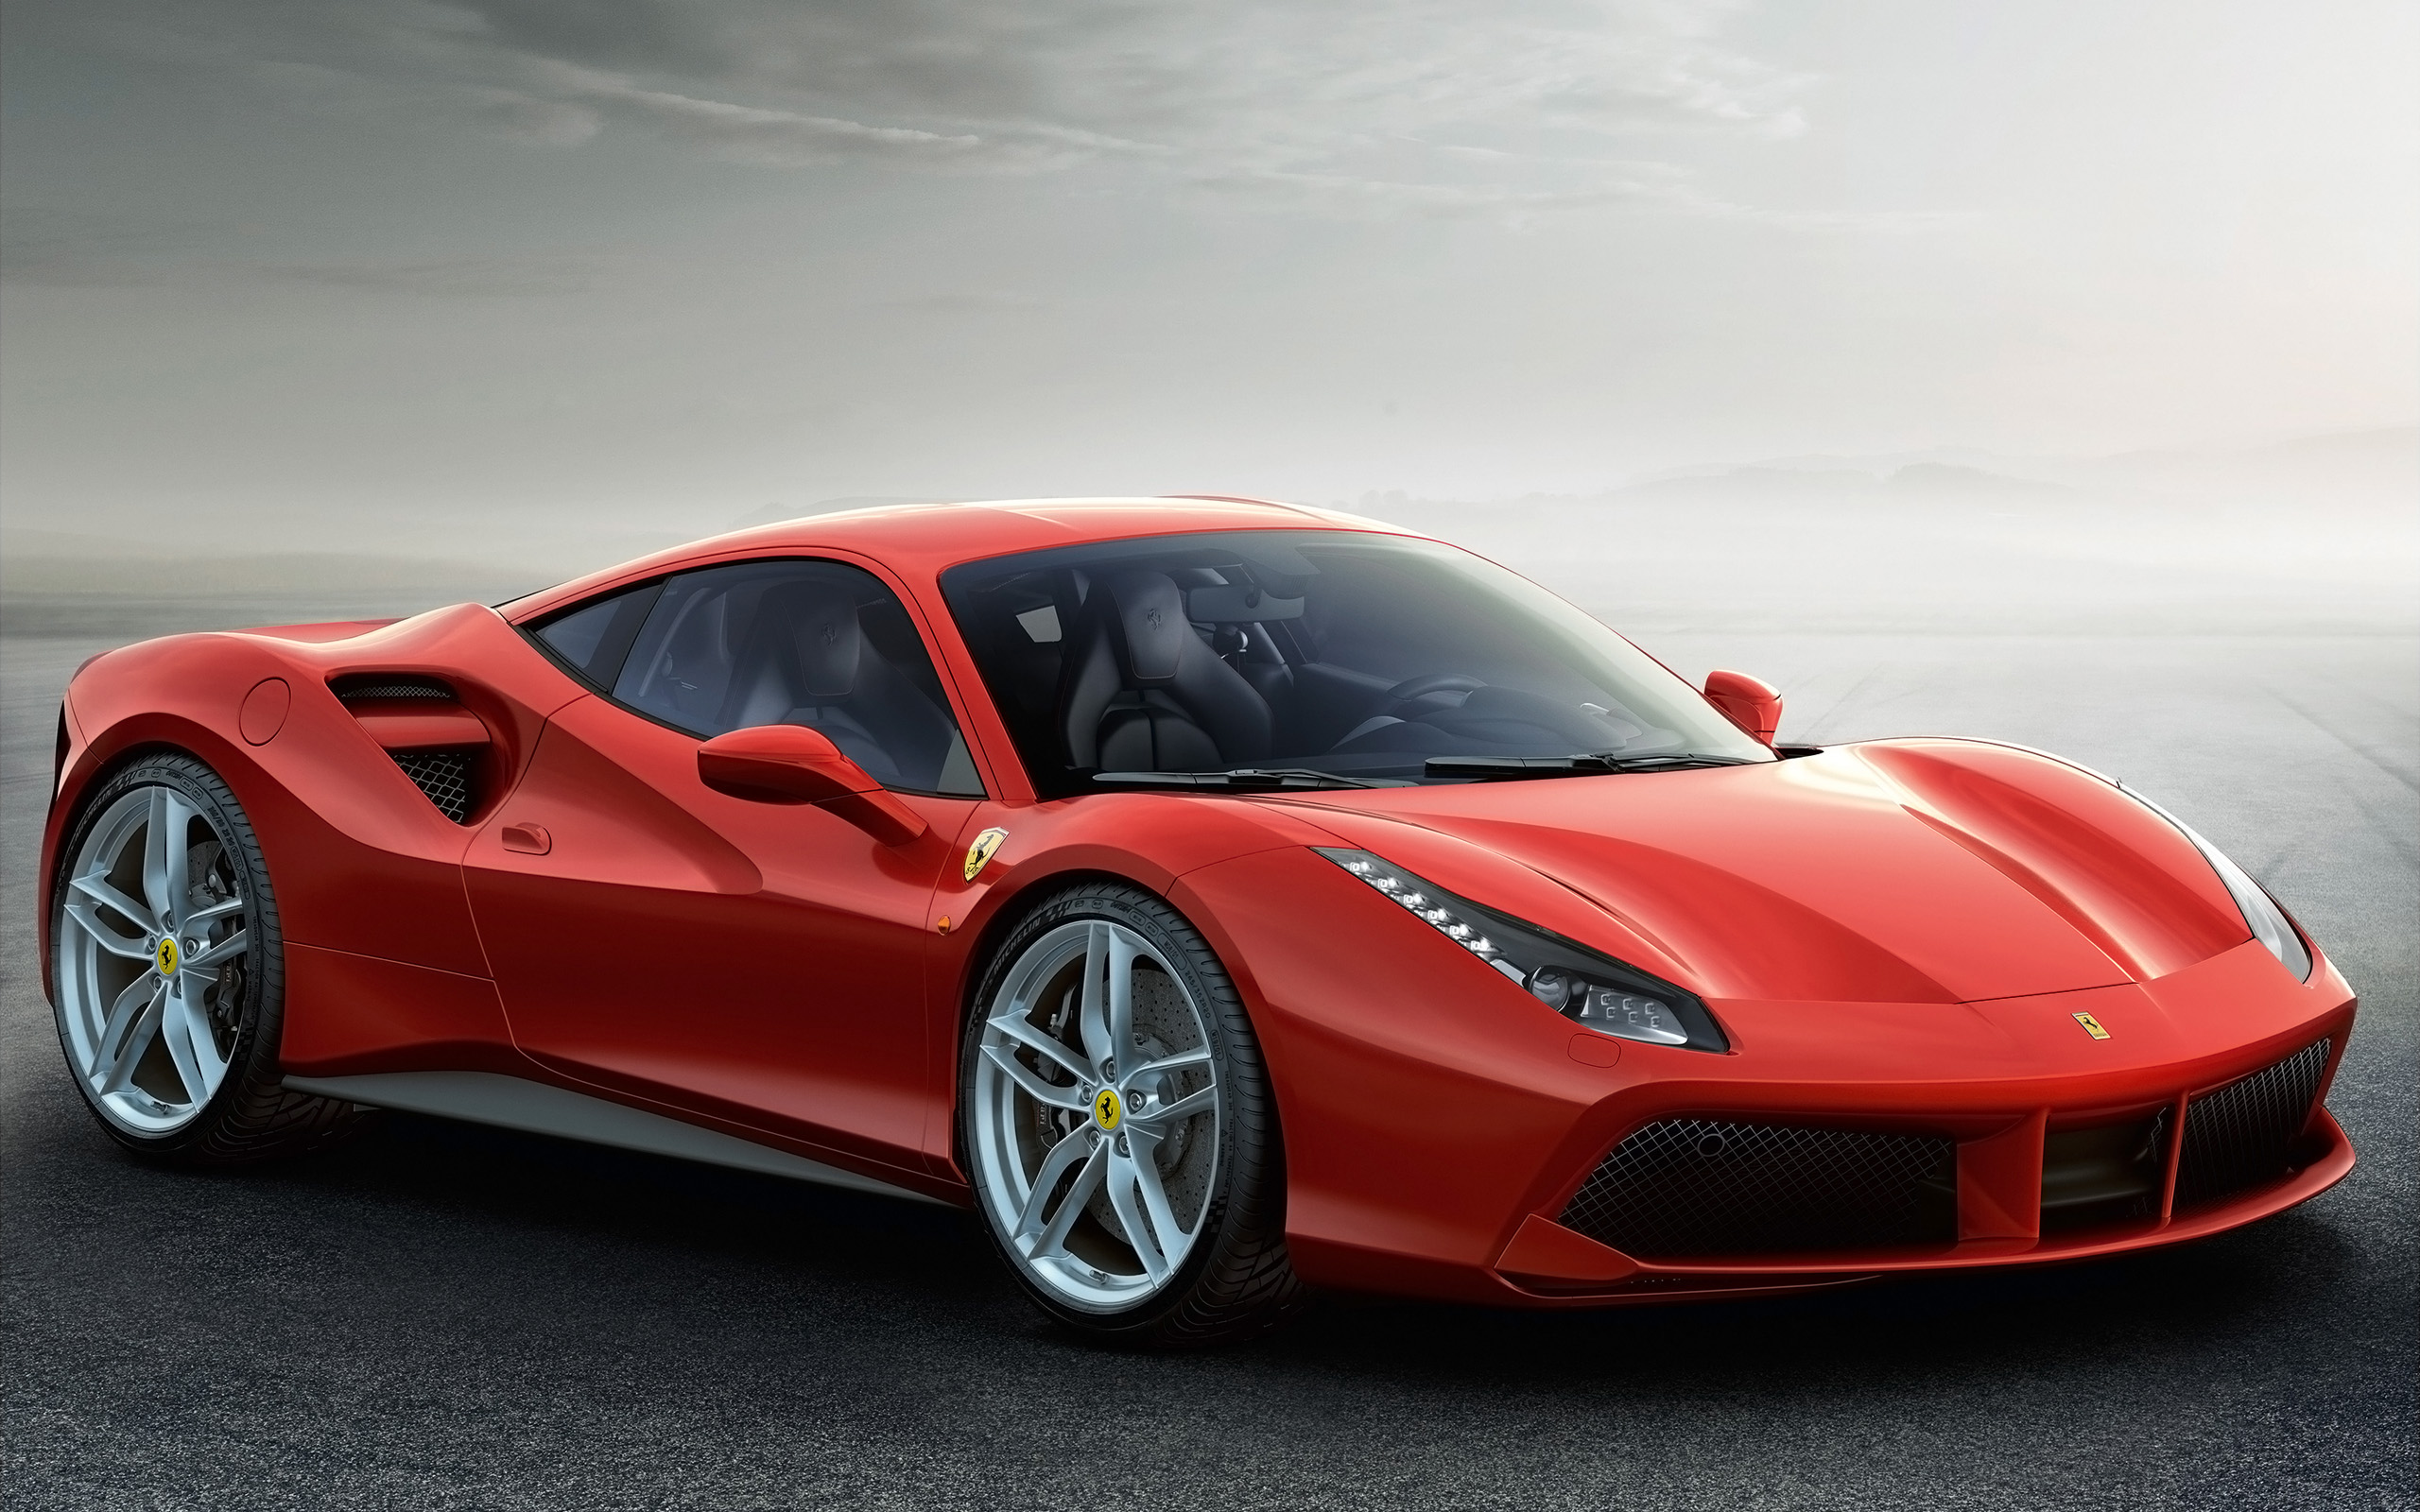 Red Ferrari 488: A sleek and powerful supercar in vibrant red, showcasing Italian automotive excellence and exhilarating performance.